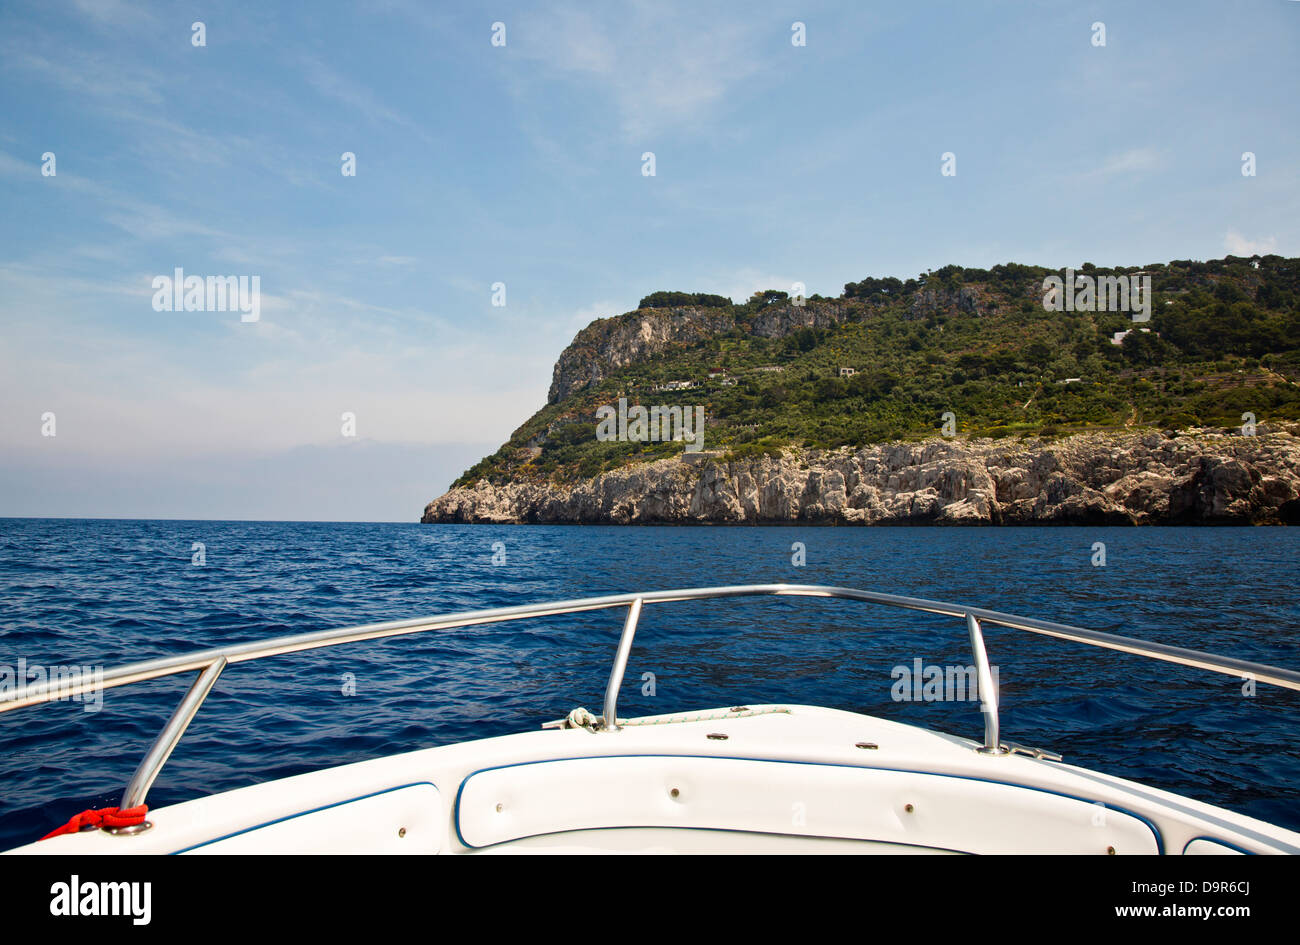 Boat in the sea with cliff in the background, Capri, Naples Province, Campania, Italy Stock Photo